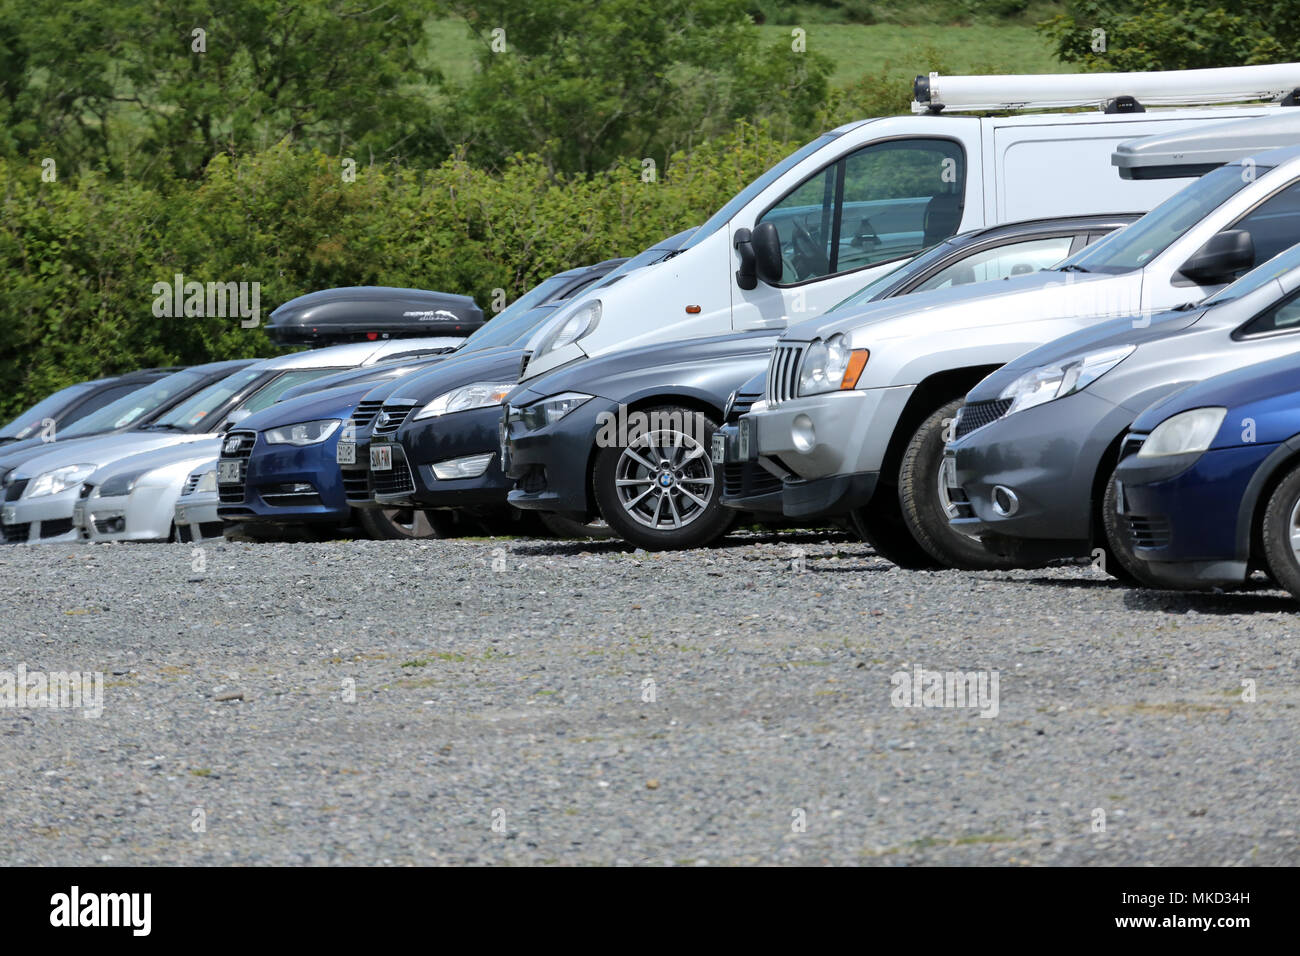 June 2014 - Line of parked cars and vans Stock Photo